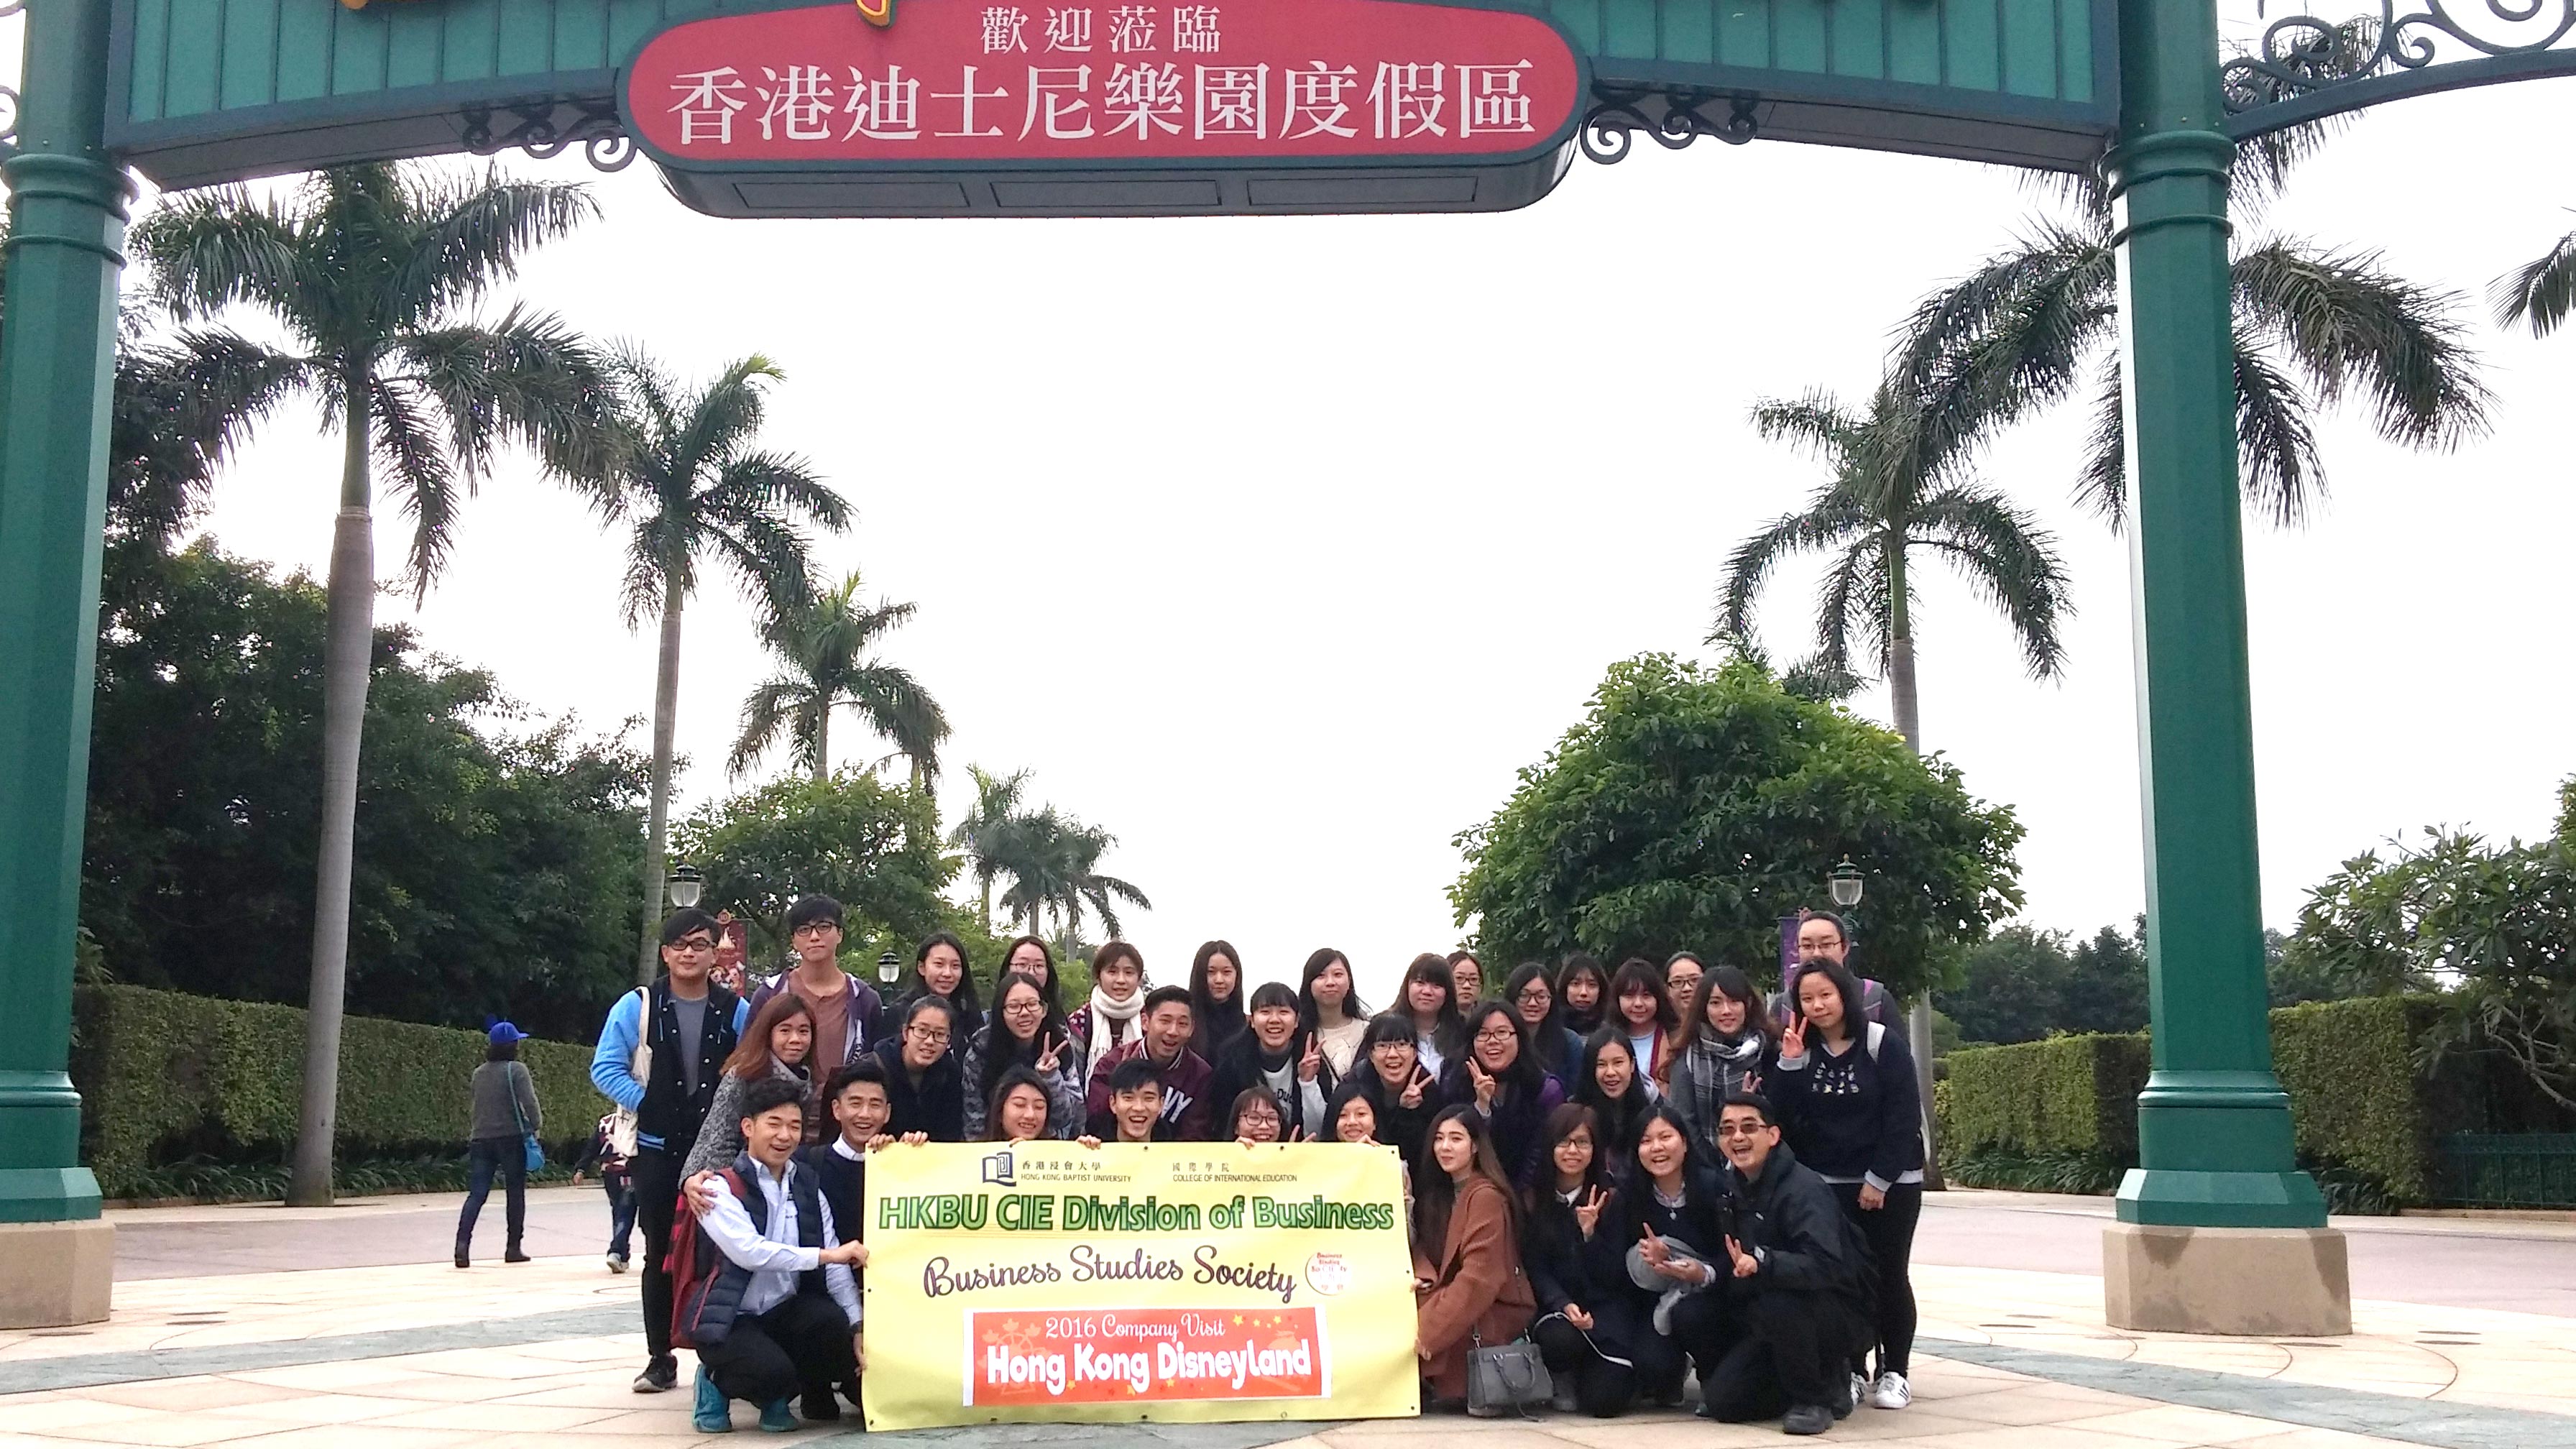 Dr. Martin Tsui led the students from CIE Business Studies Society to visit the backstage and operation center of Hong Kong Disneyland.